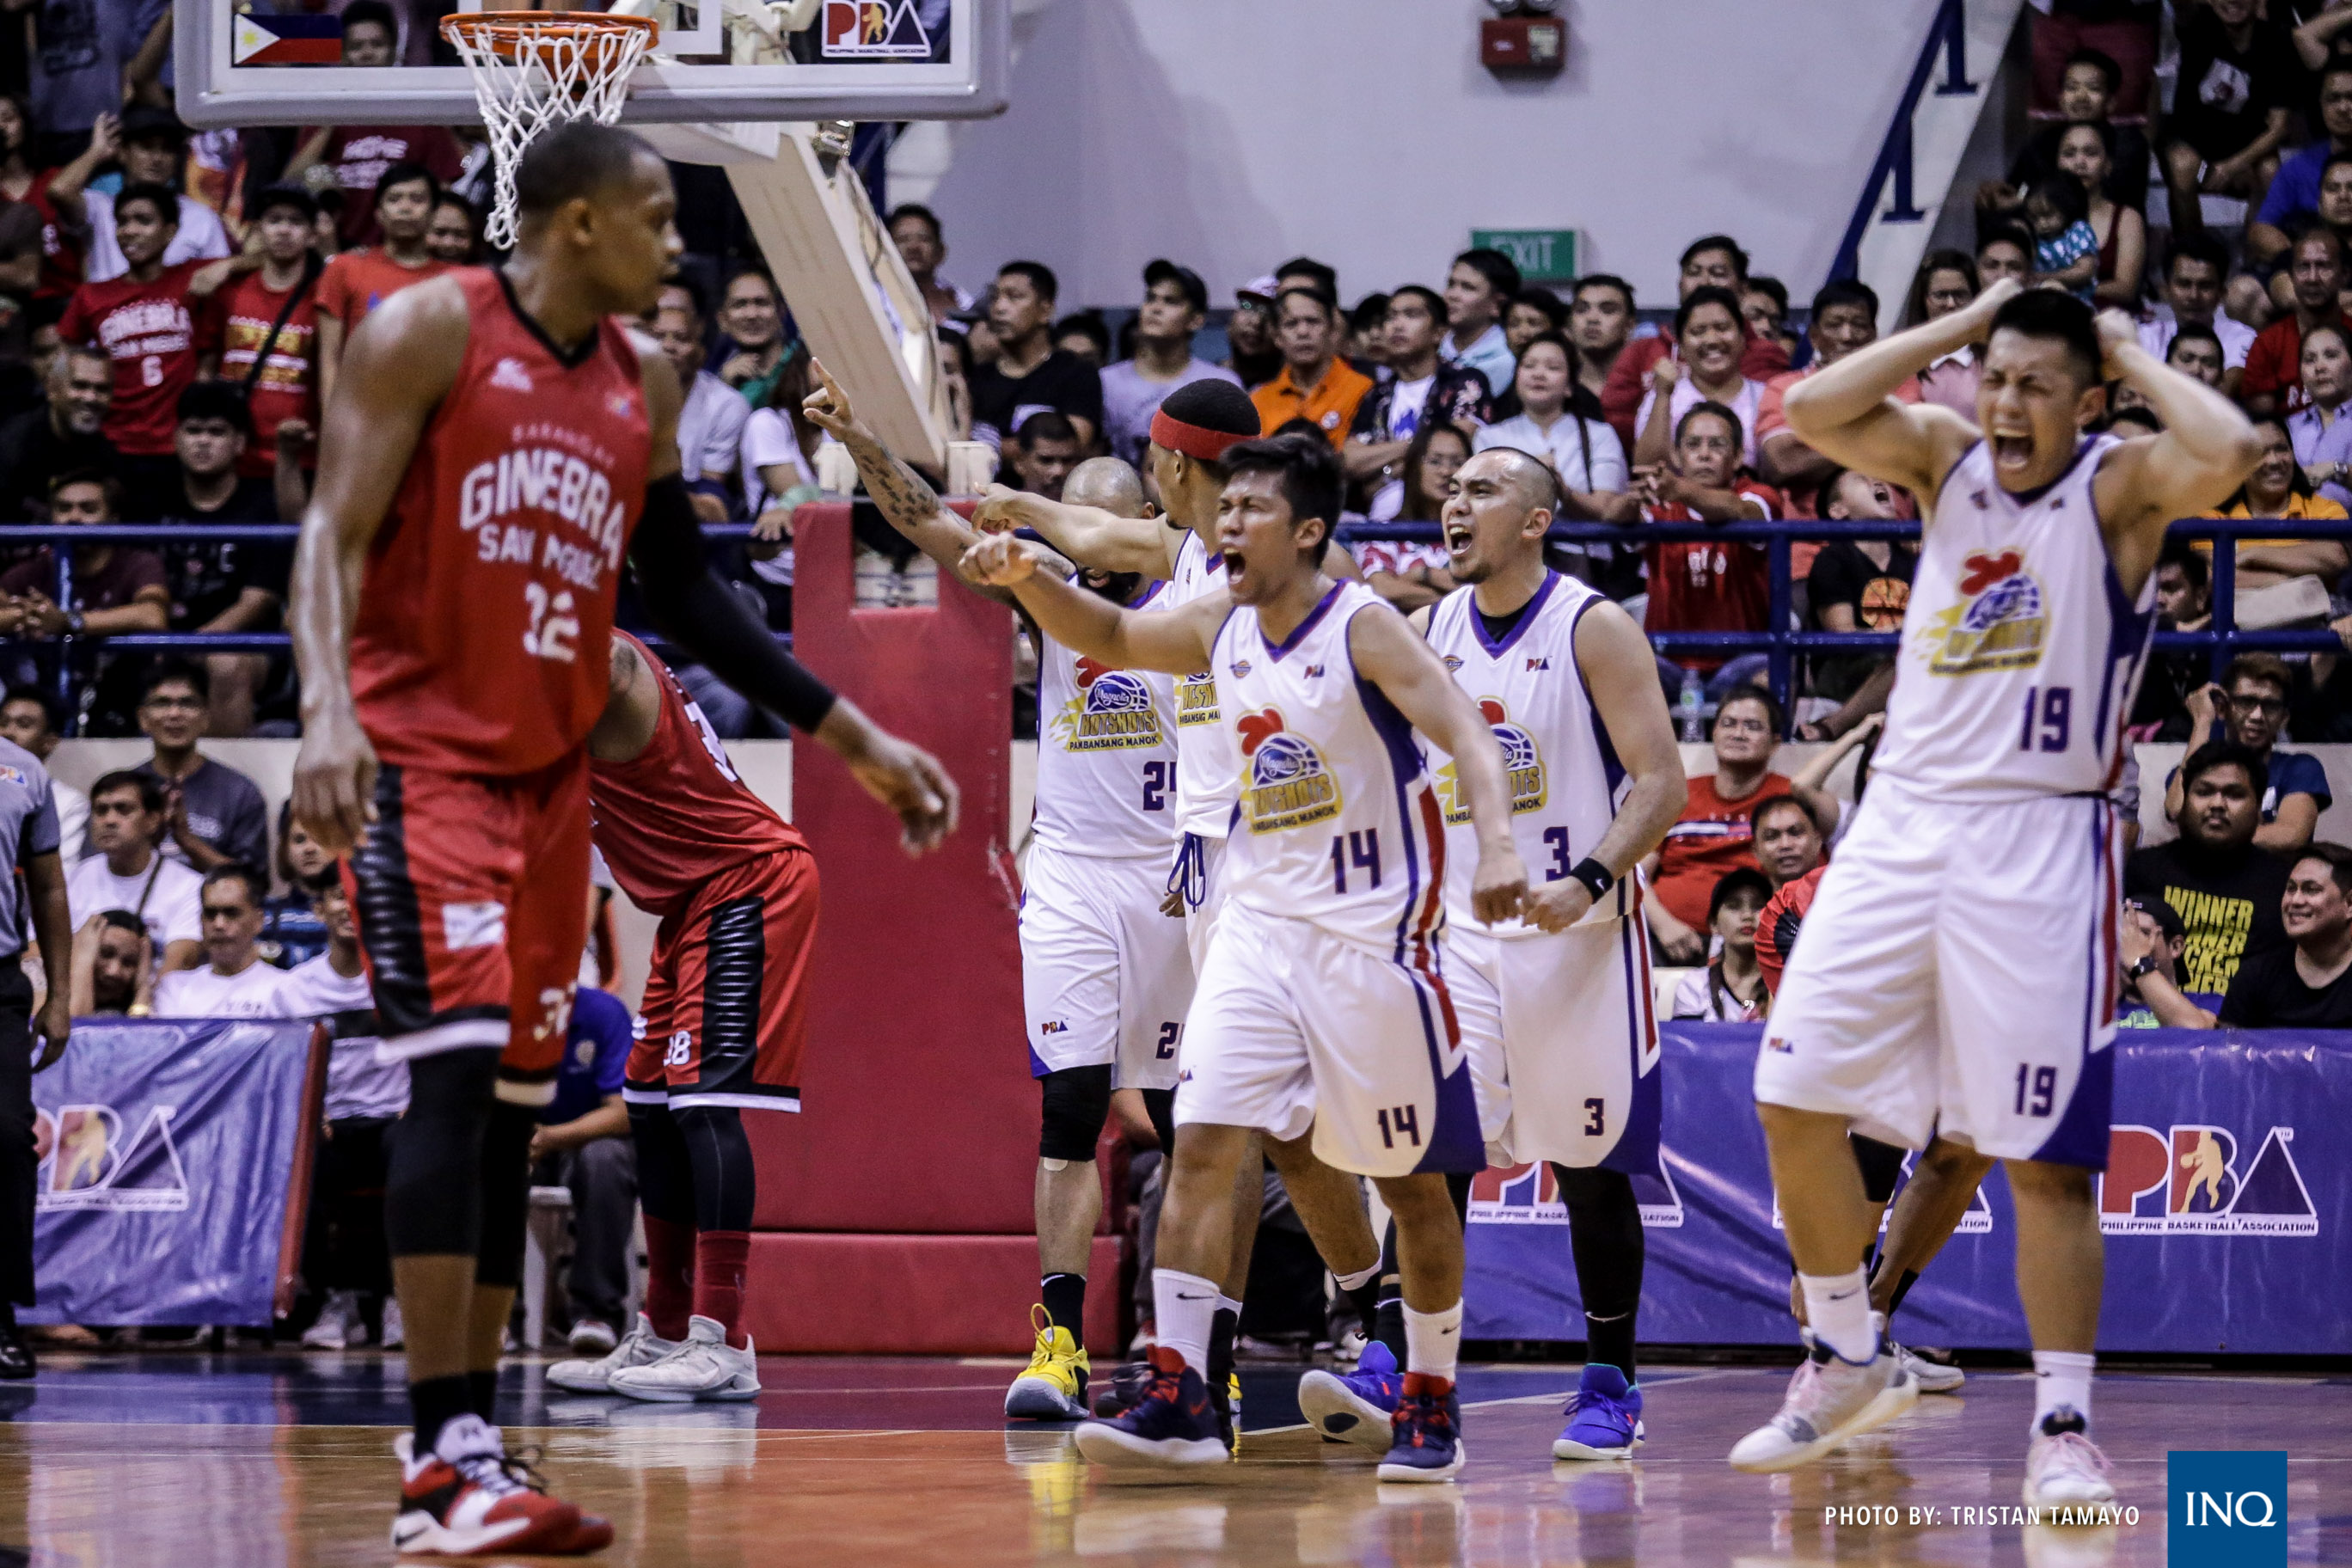 Hotshots put together a mighty stand in the clutch and closed out a classic best-of-five Final Four series against Barangay Ginebra